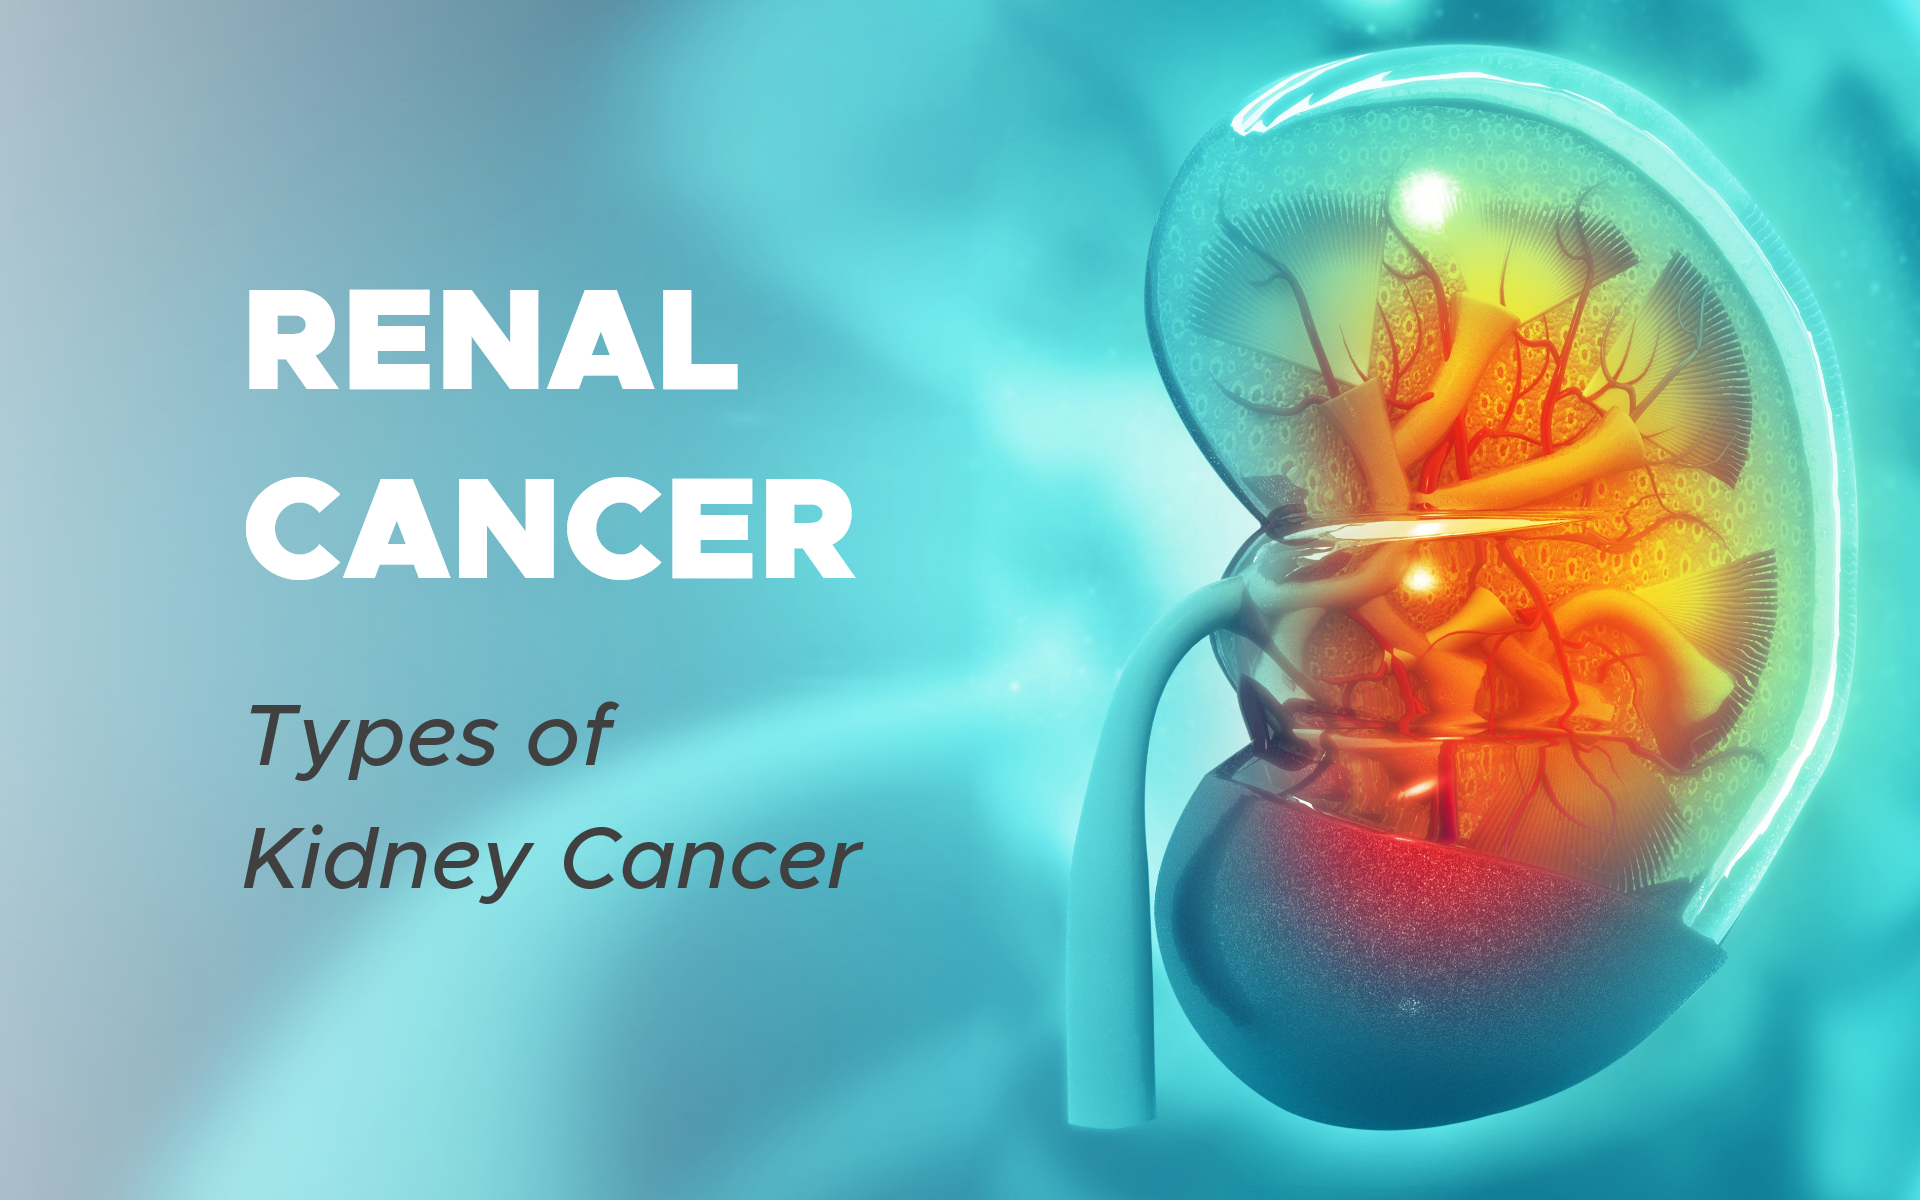 Renal Cancer: Types of Kidney Cancer